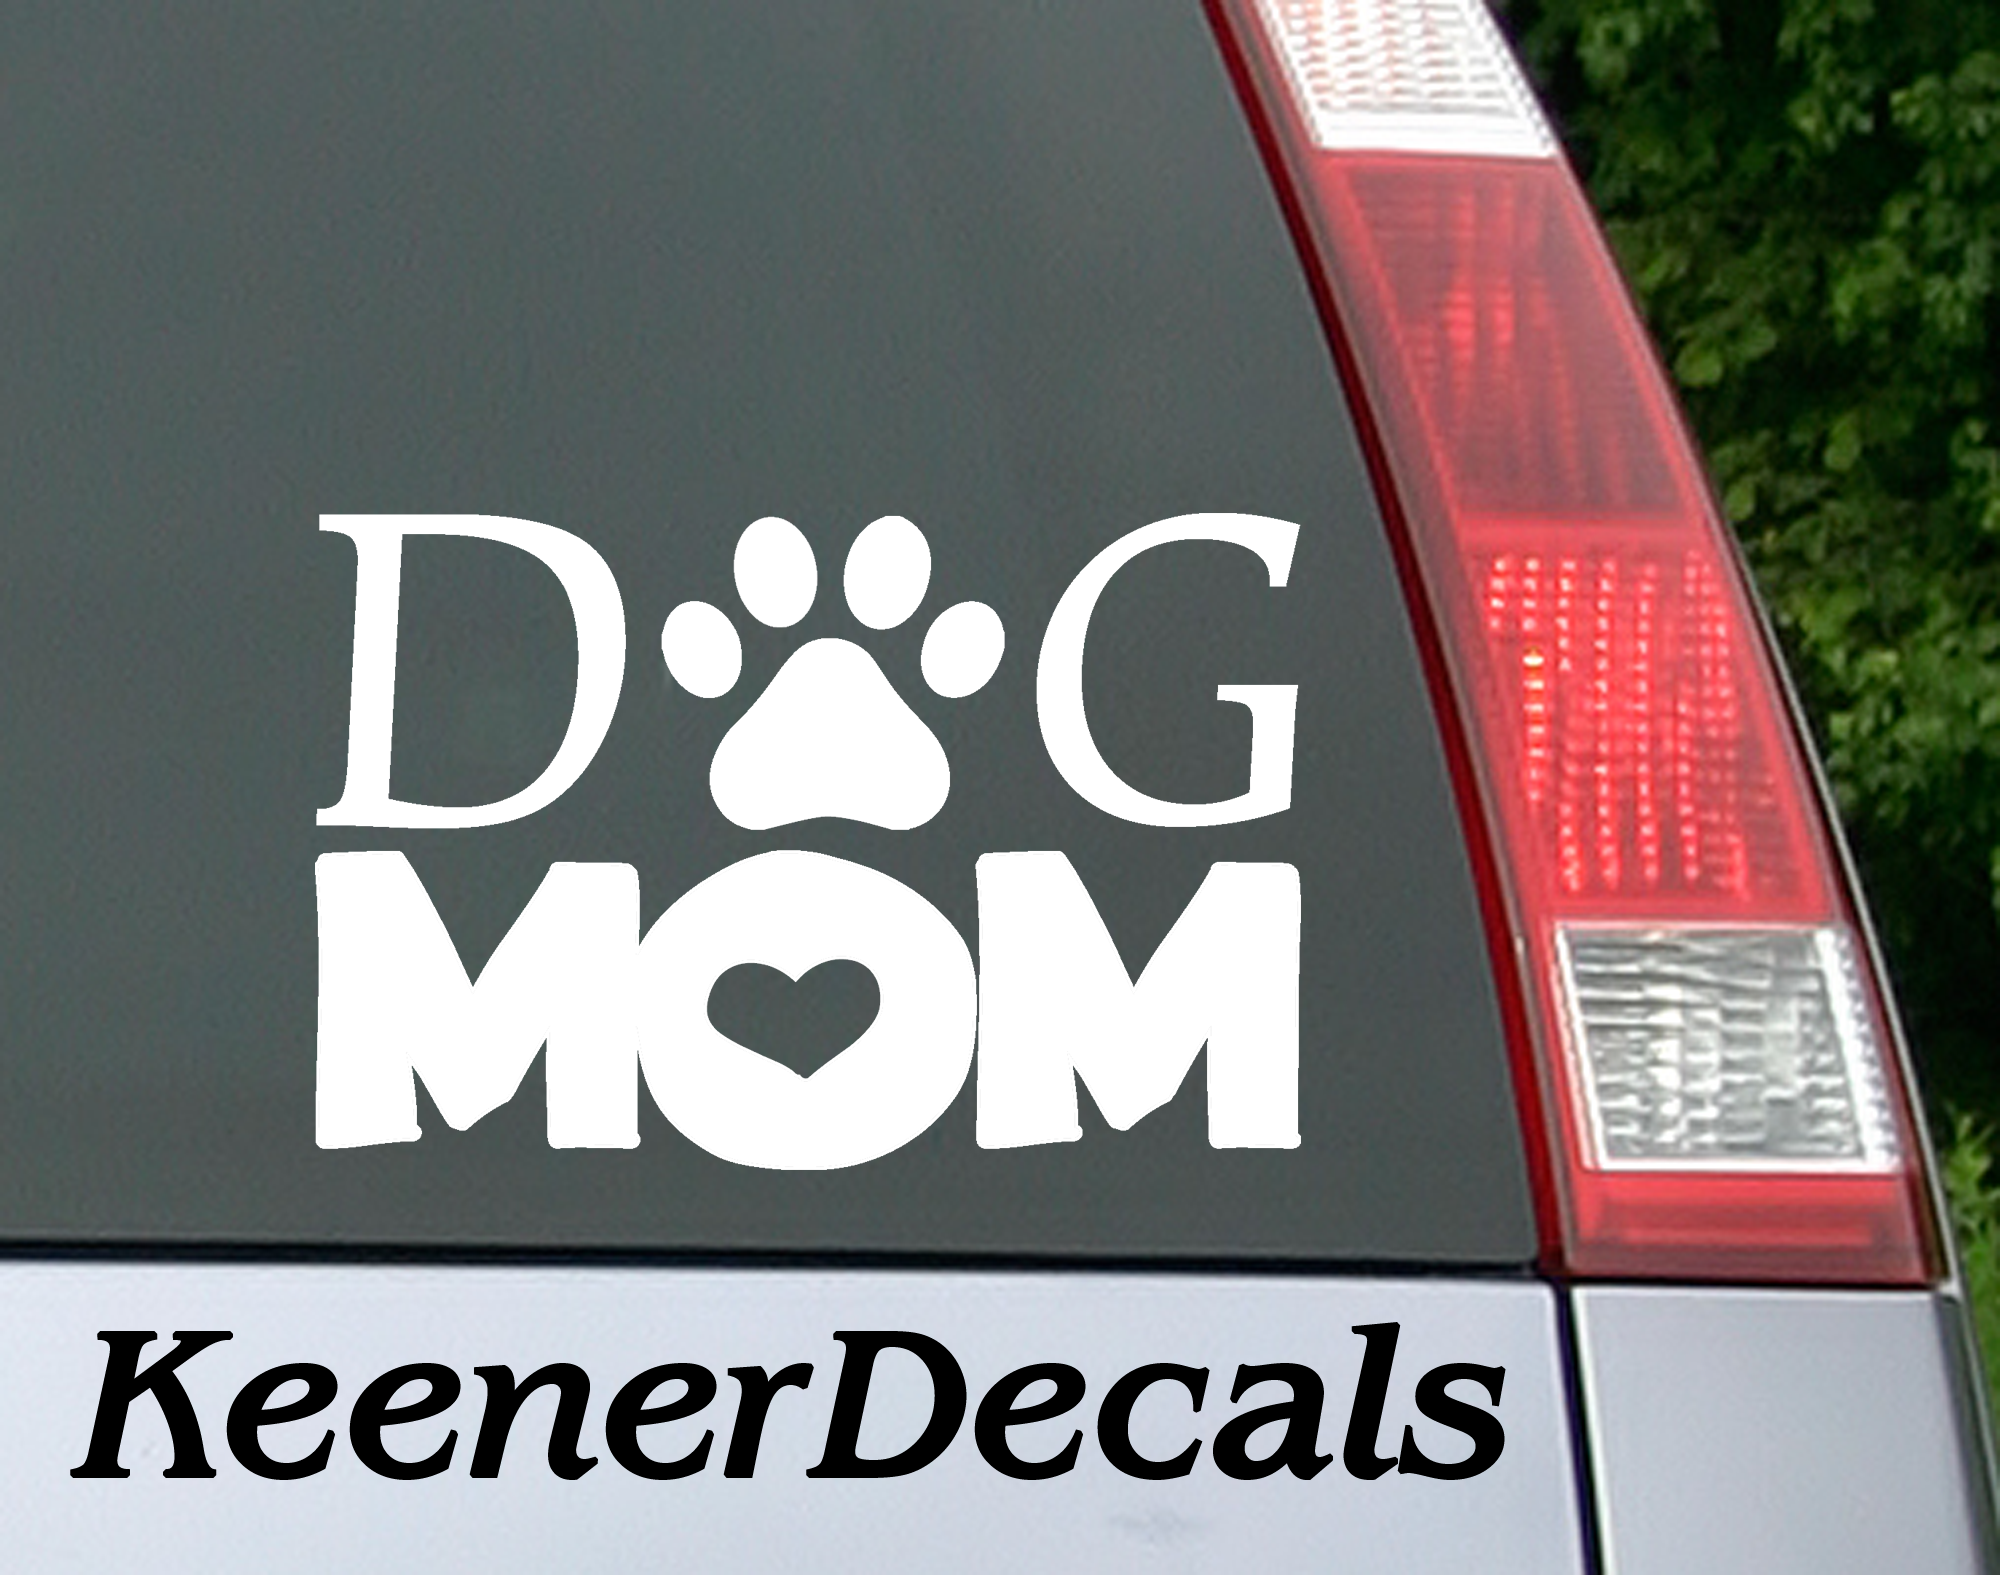 Dog Mom Vinyl Car Decal Bumper Sticker. Let the world owner you are a proud fur-baby Momma!  4.5"W x 3"H Funny Car Decal, Car Sticker, Car Vinyl, Bumper Sticker, Vinyl Stickers, Vinyl Sticker.